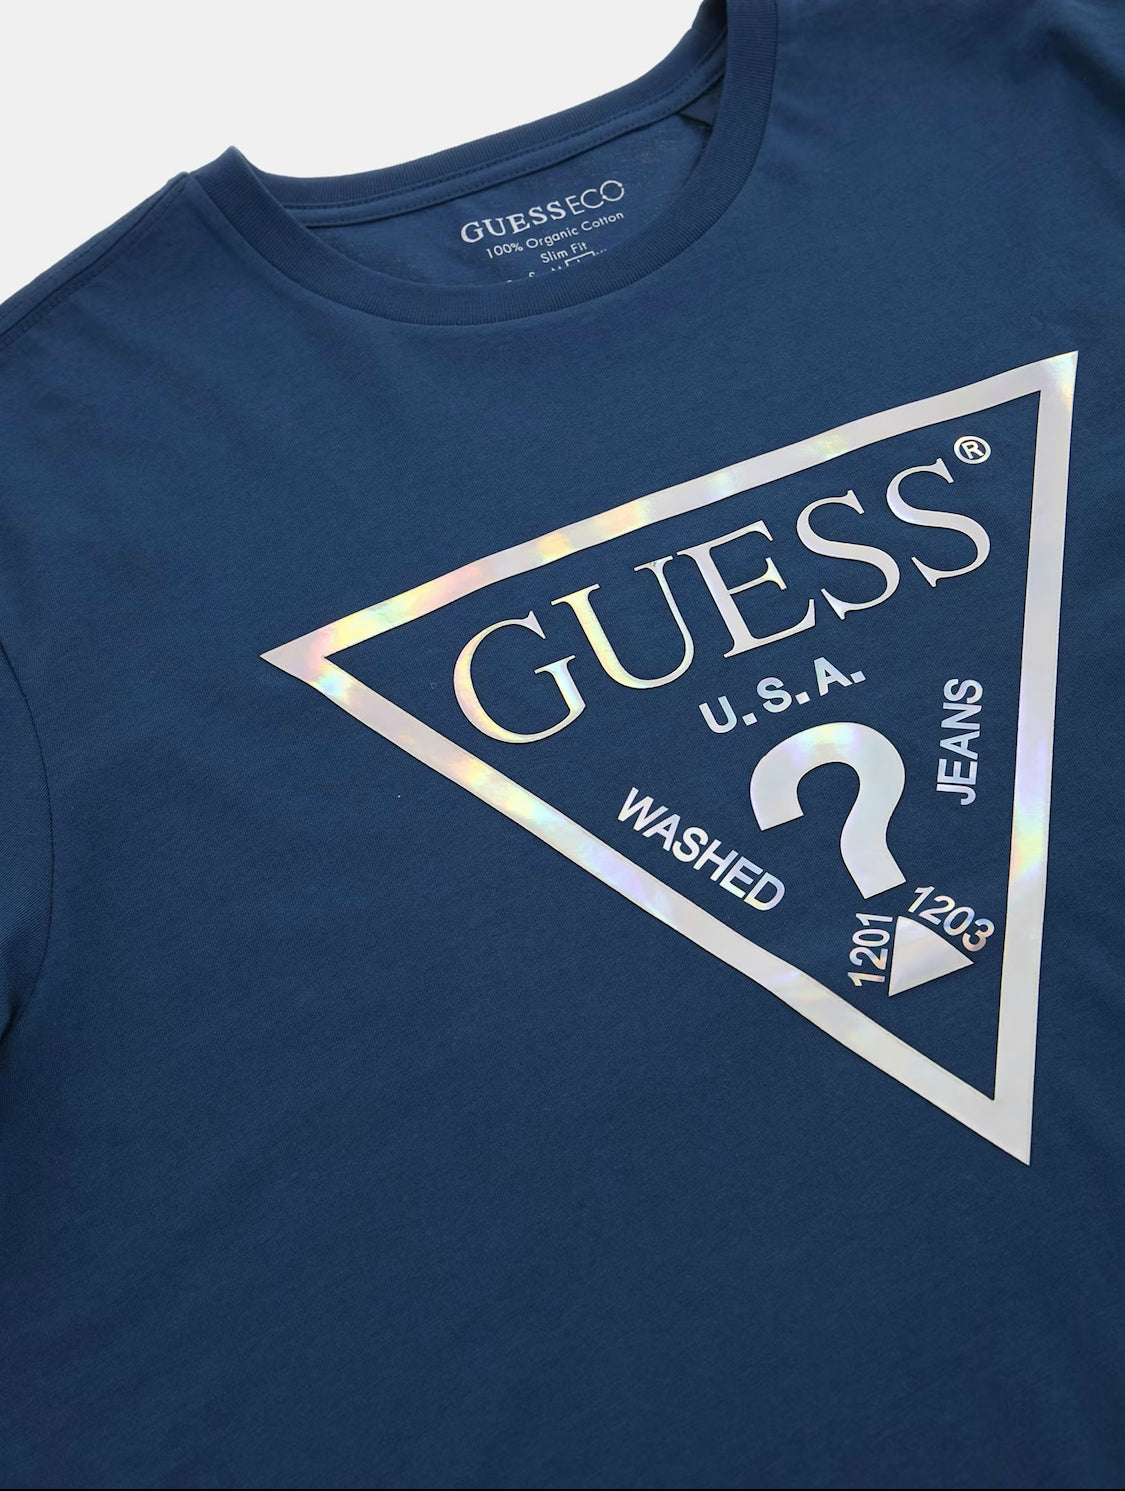 Guess Foil Triangle T-Shirt